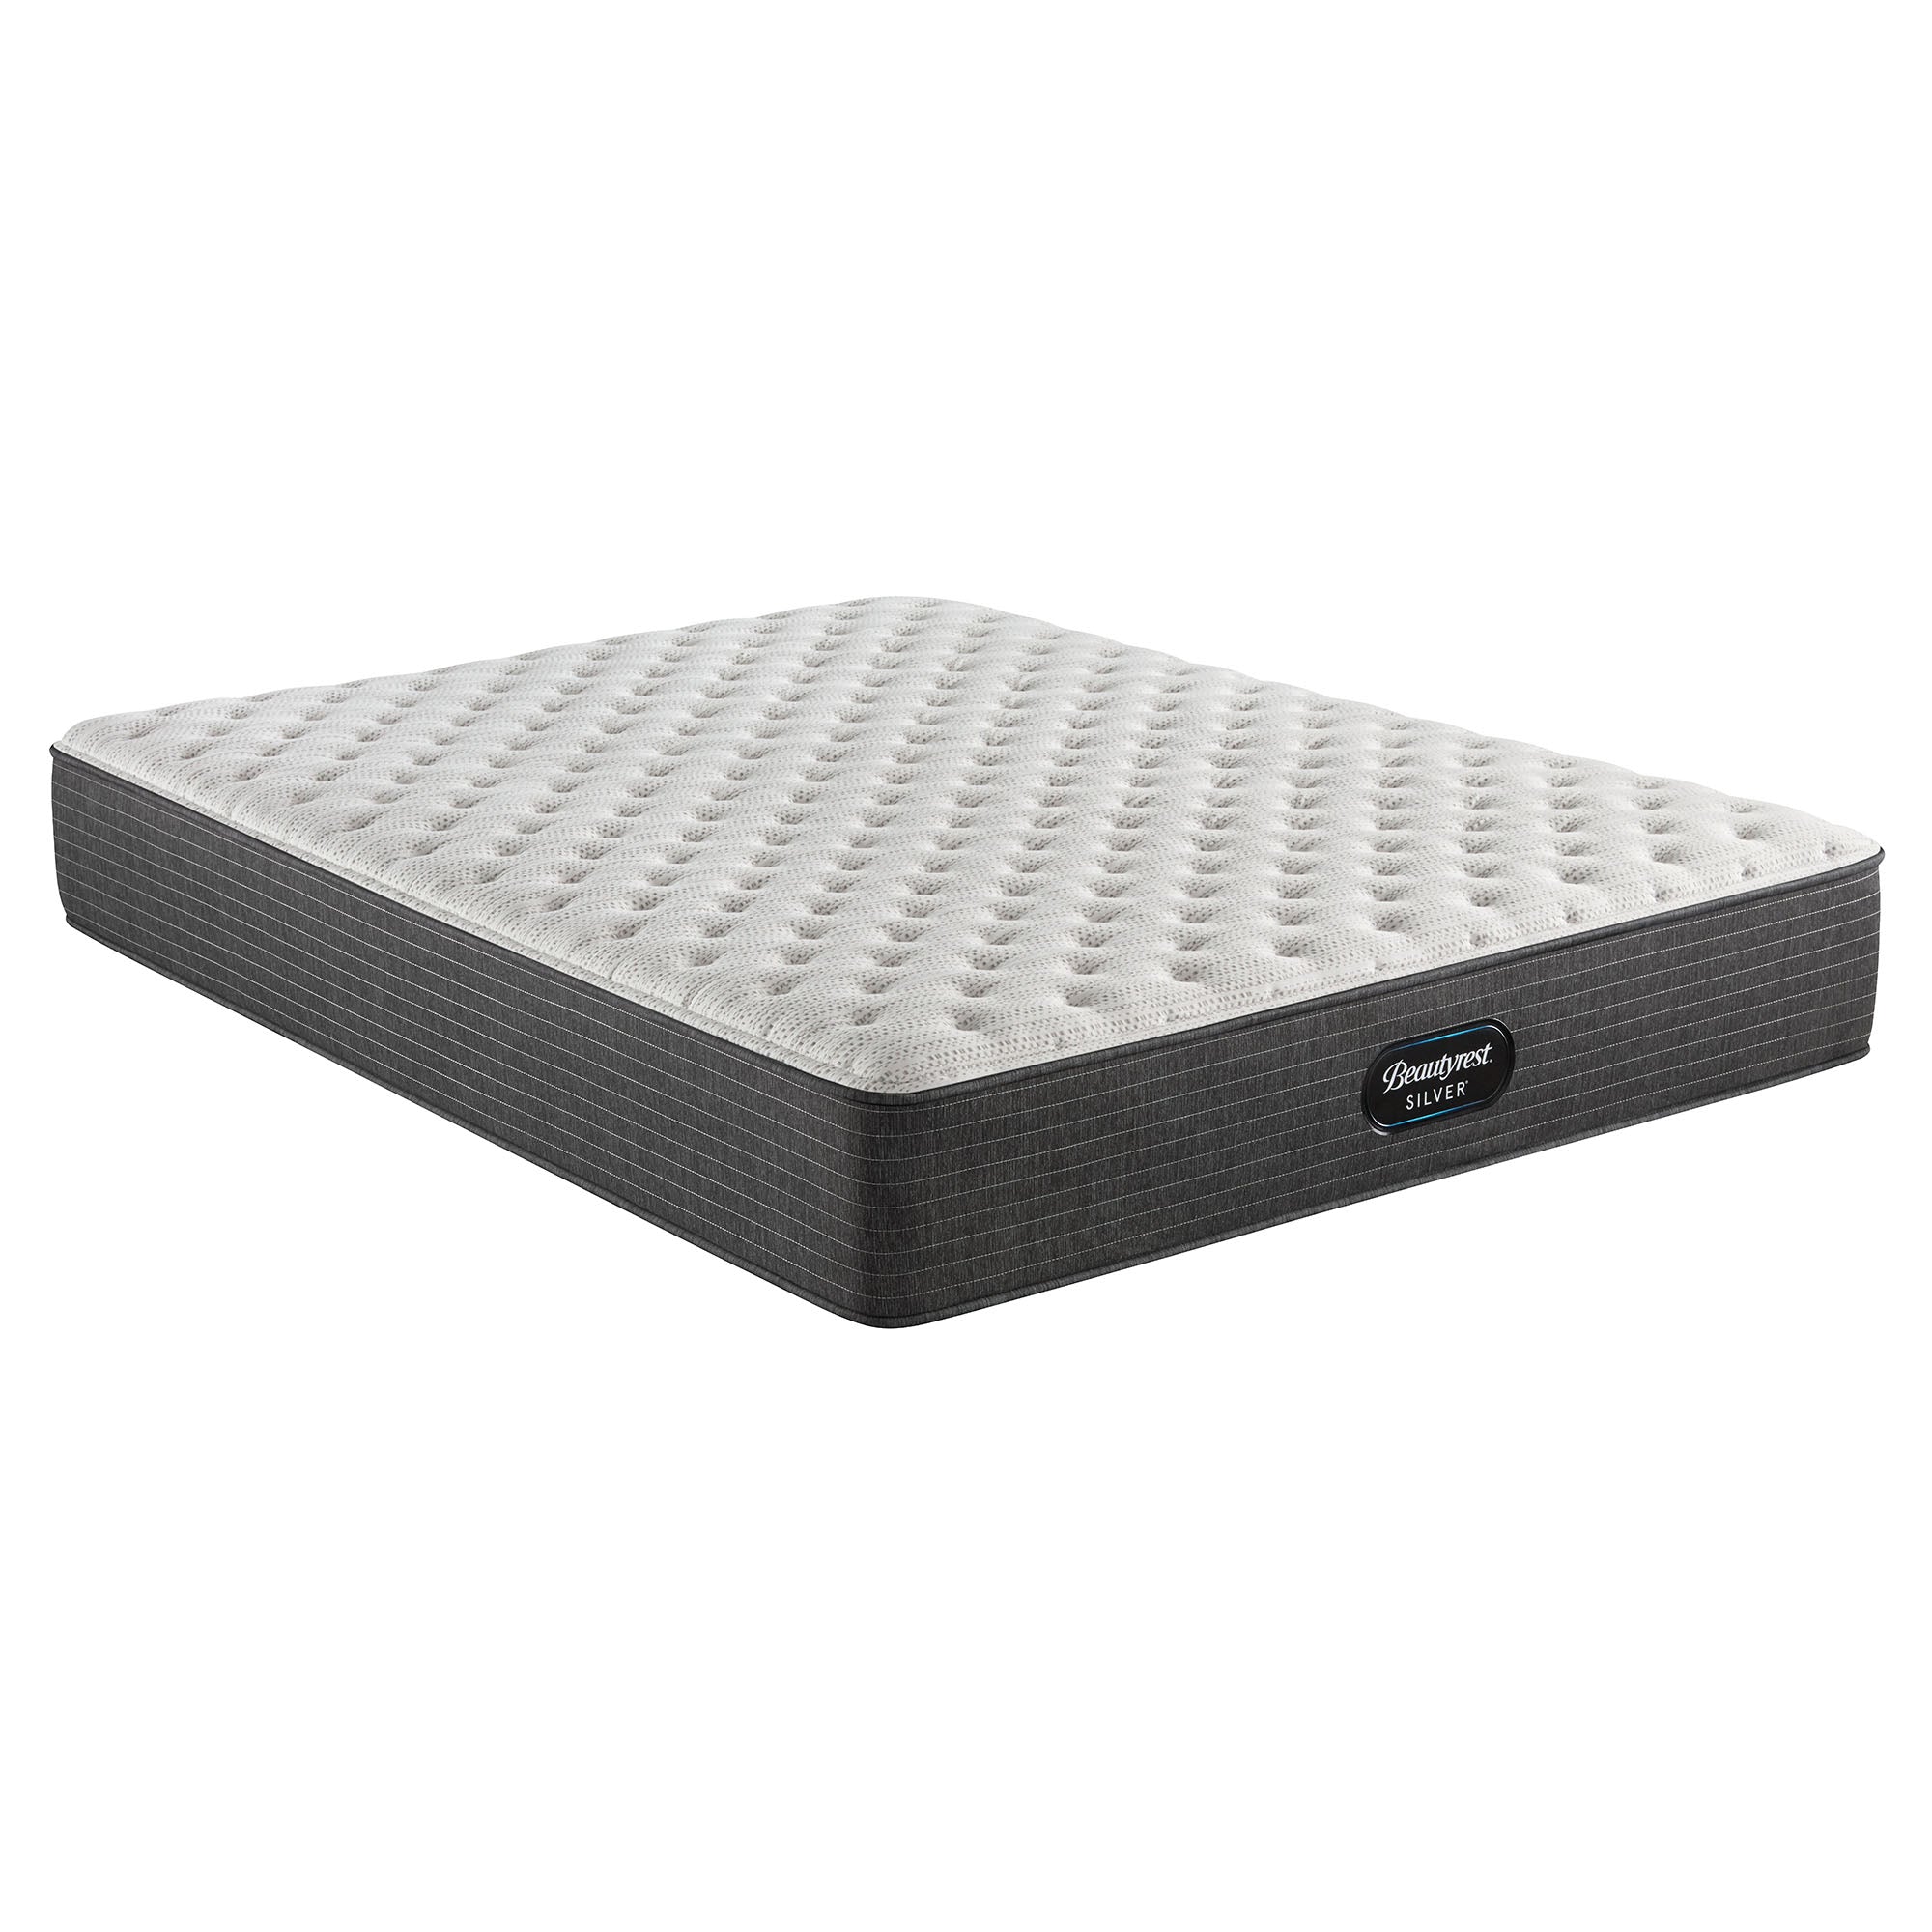 The Beautyrest Silver BRS900 Extra Firm mattress alone on a white background